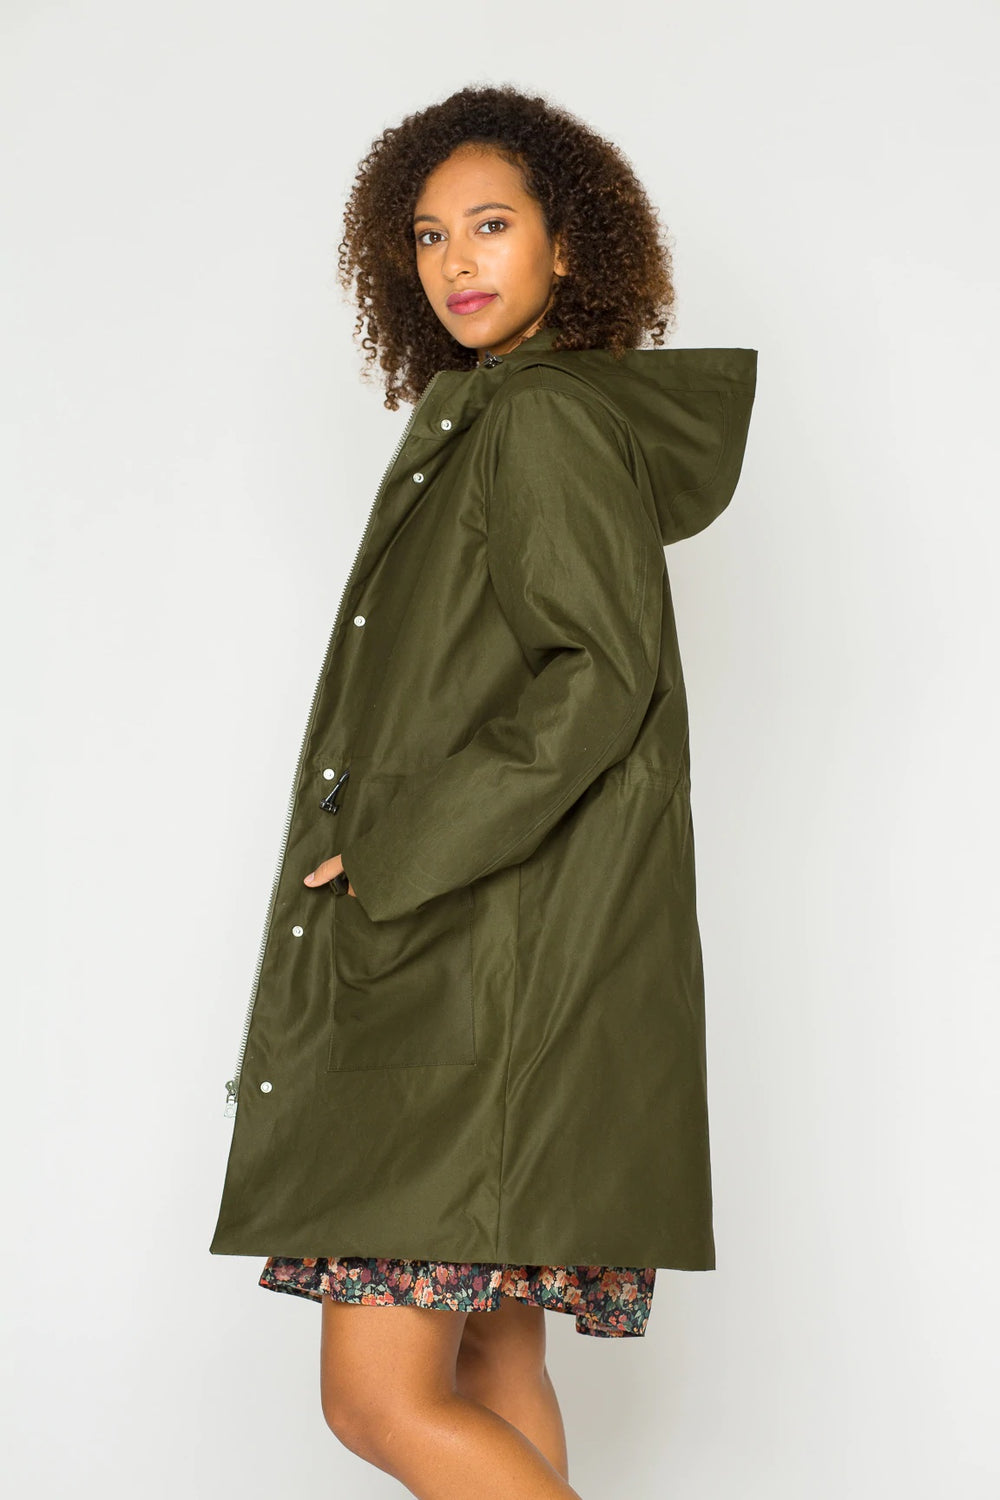 Woman wearing the Alma Parka sewing pattern from Bara Studio on The Fold Line. A coat pattern made in oil skin, canvas or denim fabrics, featuring a hood with drawstring, drawstring waist, padded lining, front pocket with flaps, front zipper closure and s